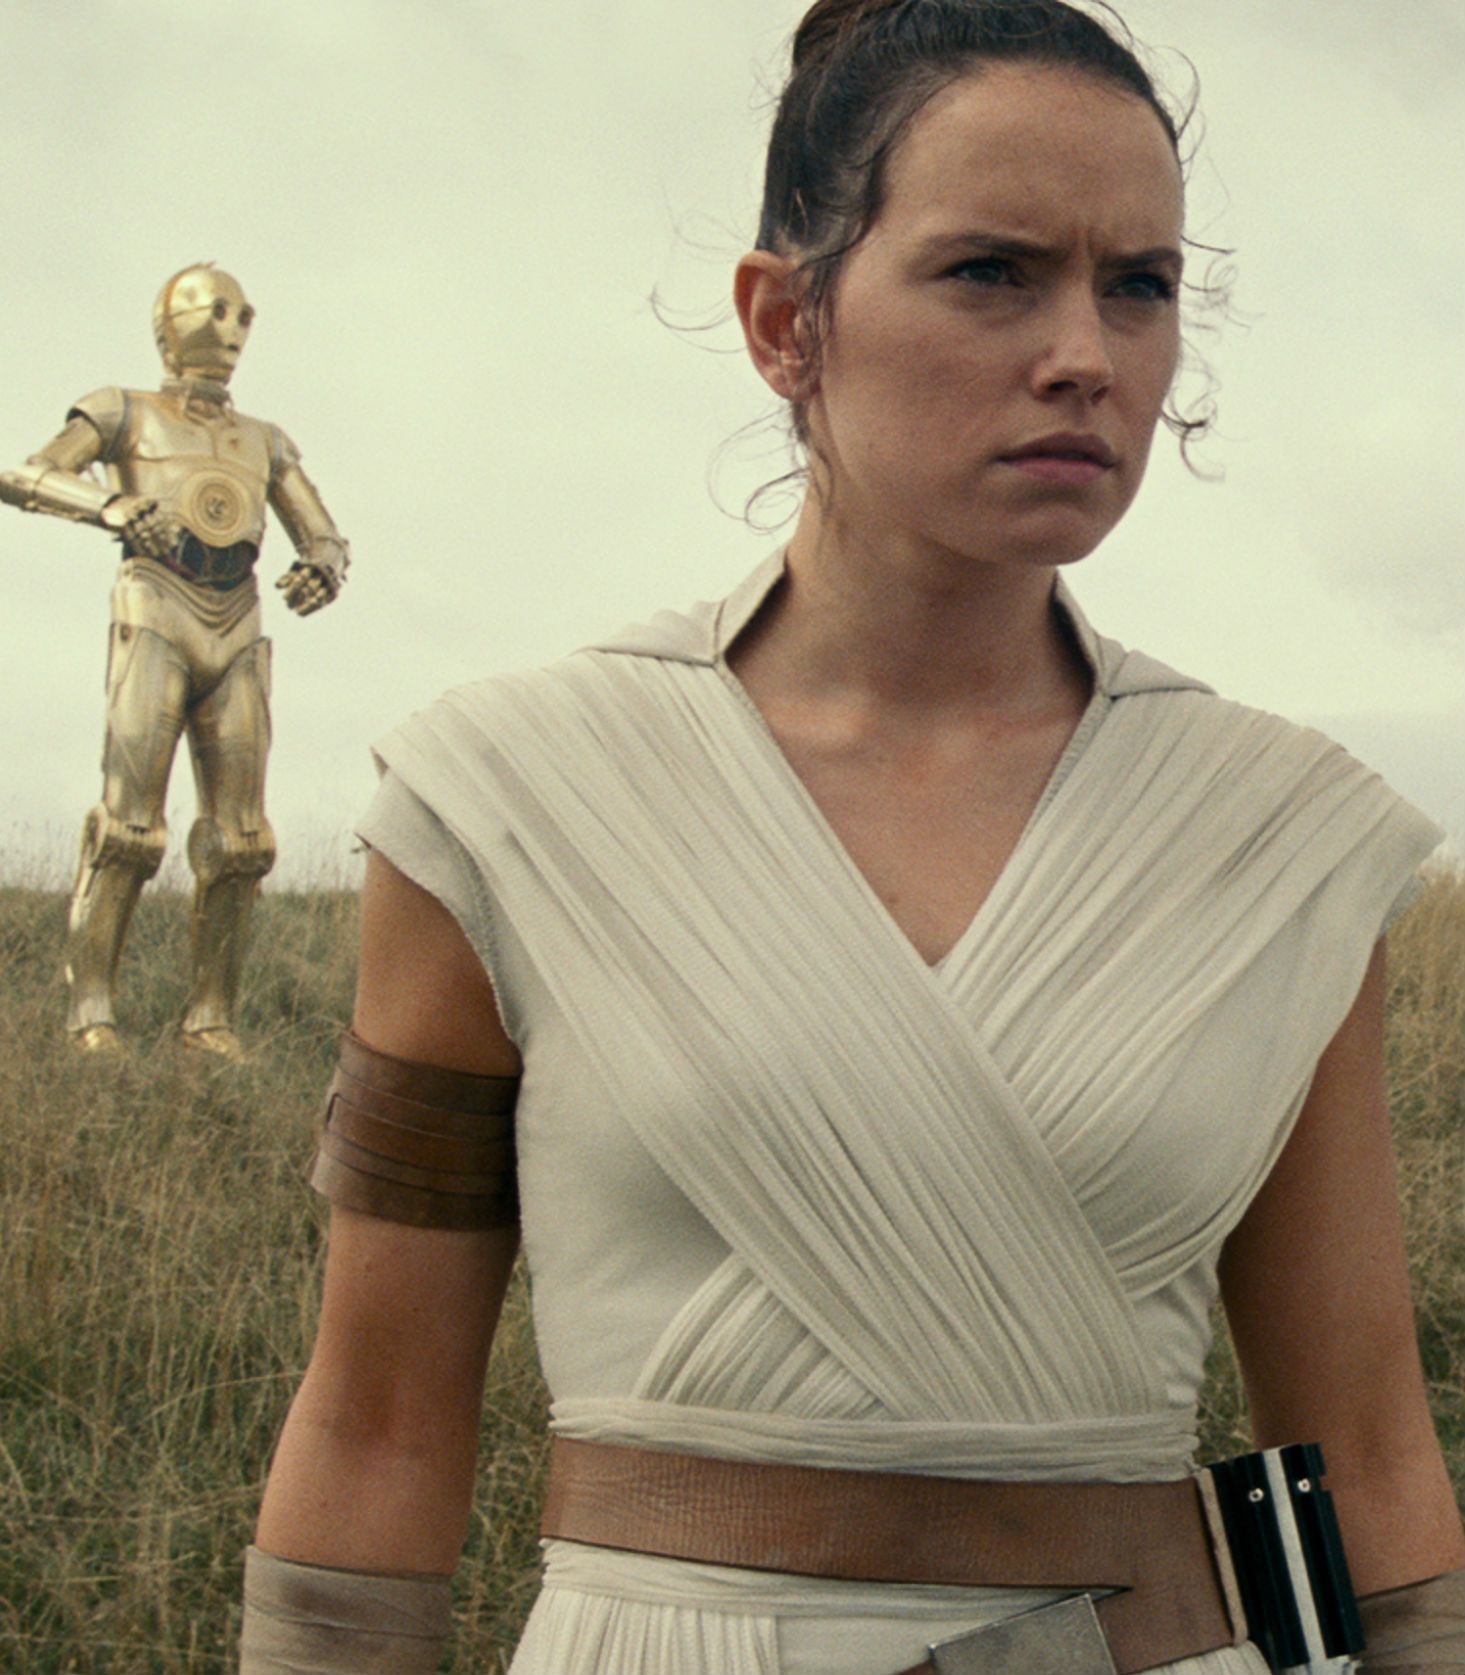 Star Wars The Rise of Skywalker Trailer - Rey and C3PO Vertical